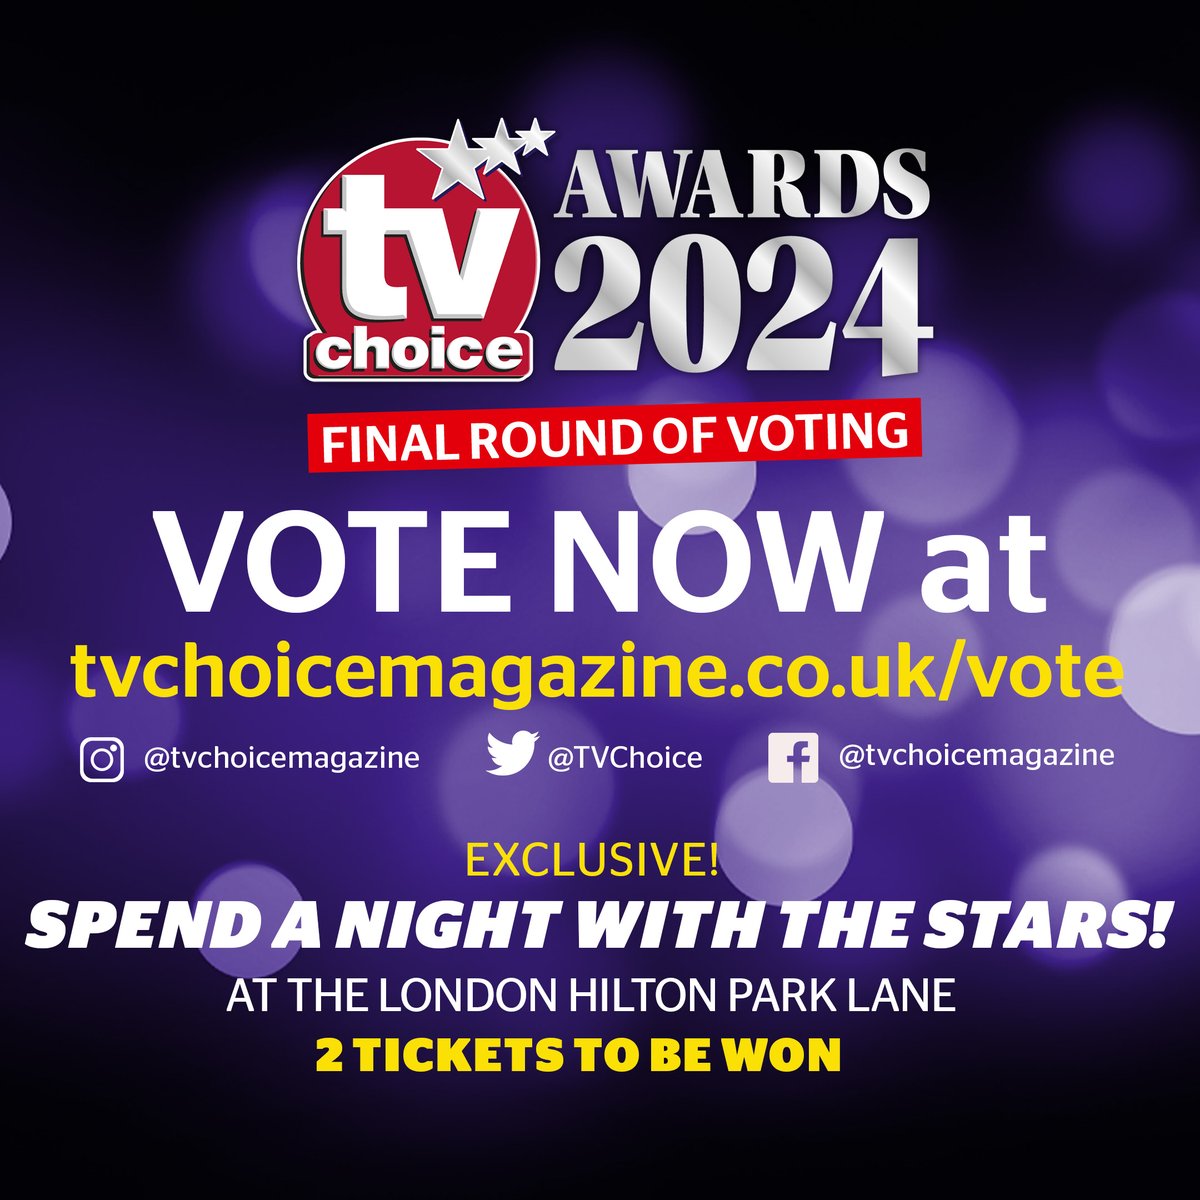 VOTING CLOSES AT MIDNIGHT TONIGHT! ⏲️ Have you voted for your faves? Even if you have, you can vote again to ensure your favourites win. Plus, you can enter a competition to join us at the awards show 🎉 Vote at tvchoicemagazine.co.uk/vote